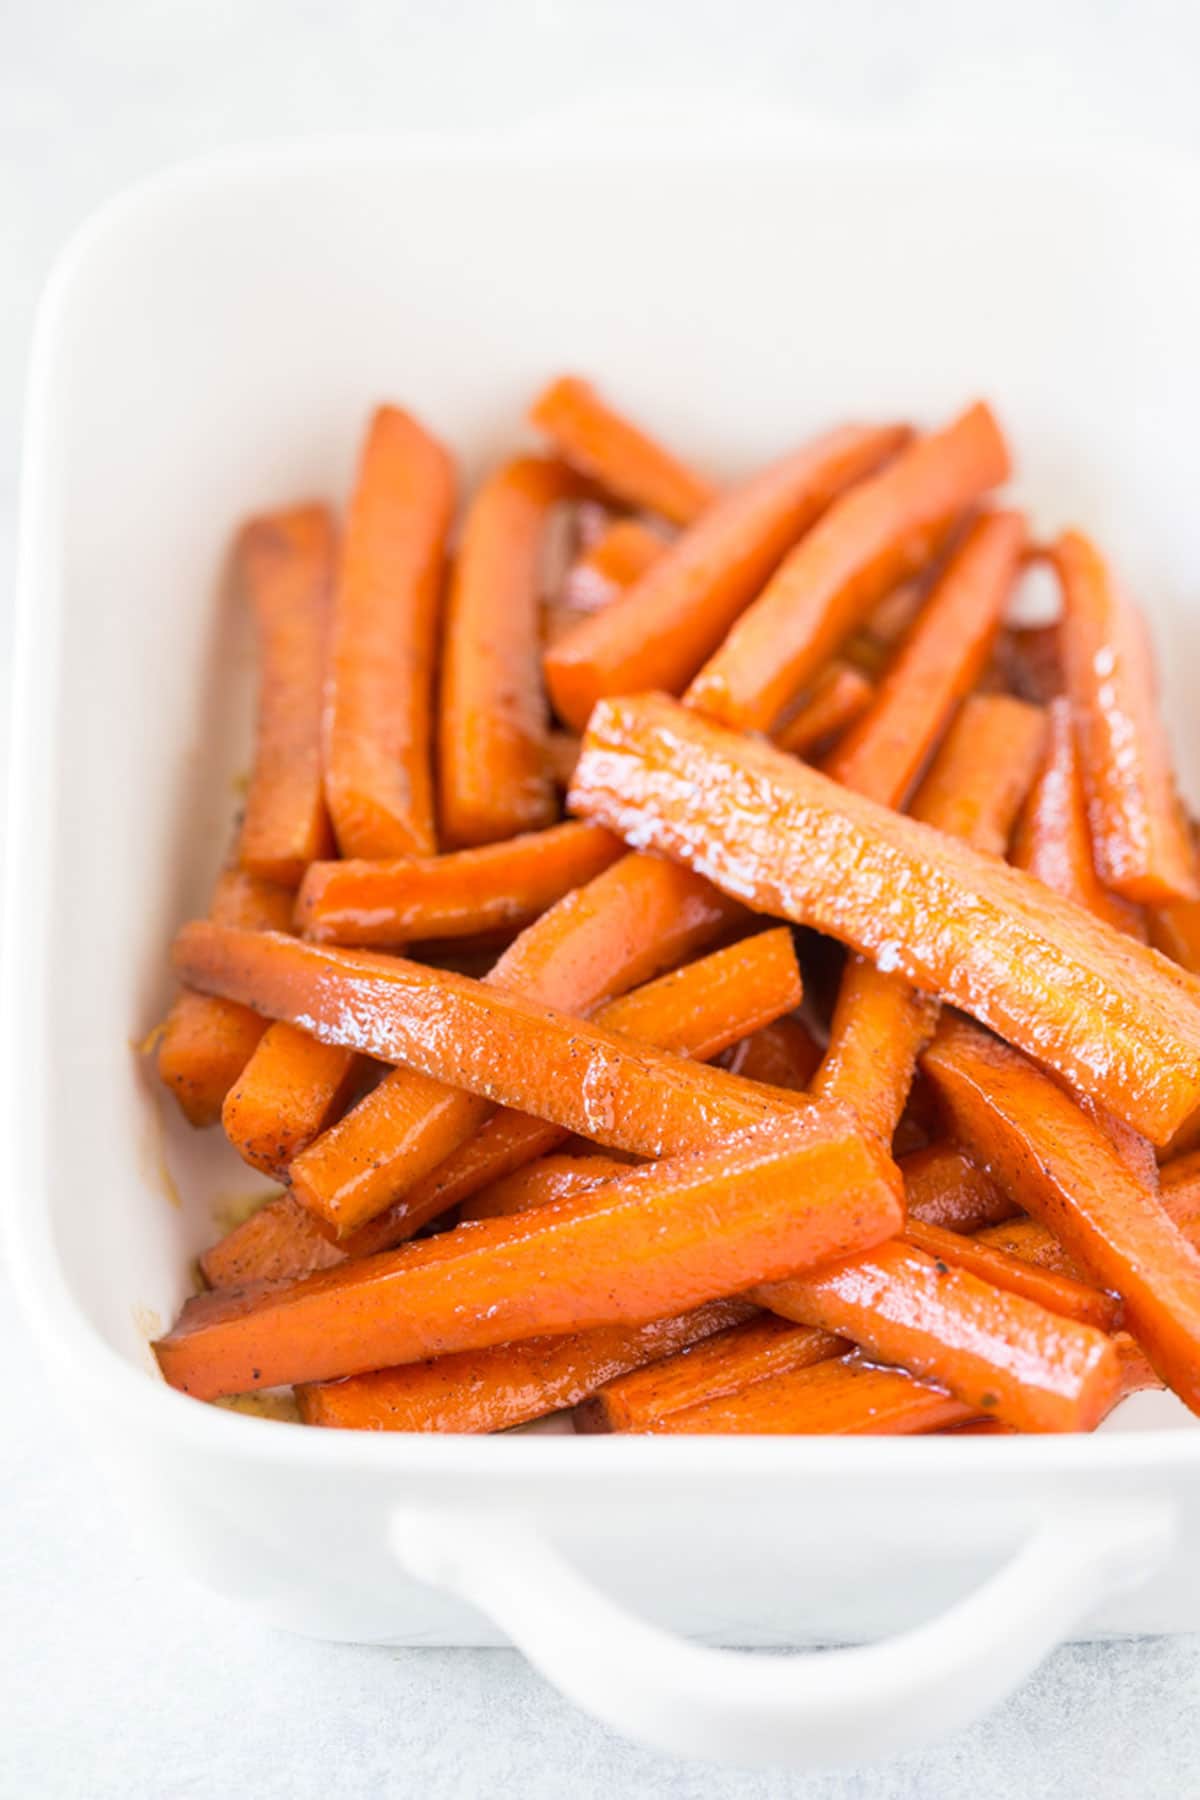 A white baking dish of cooked carrots.